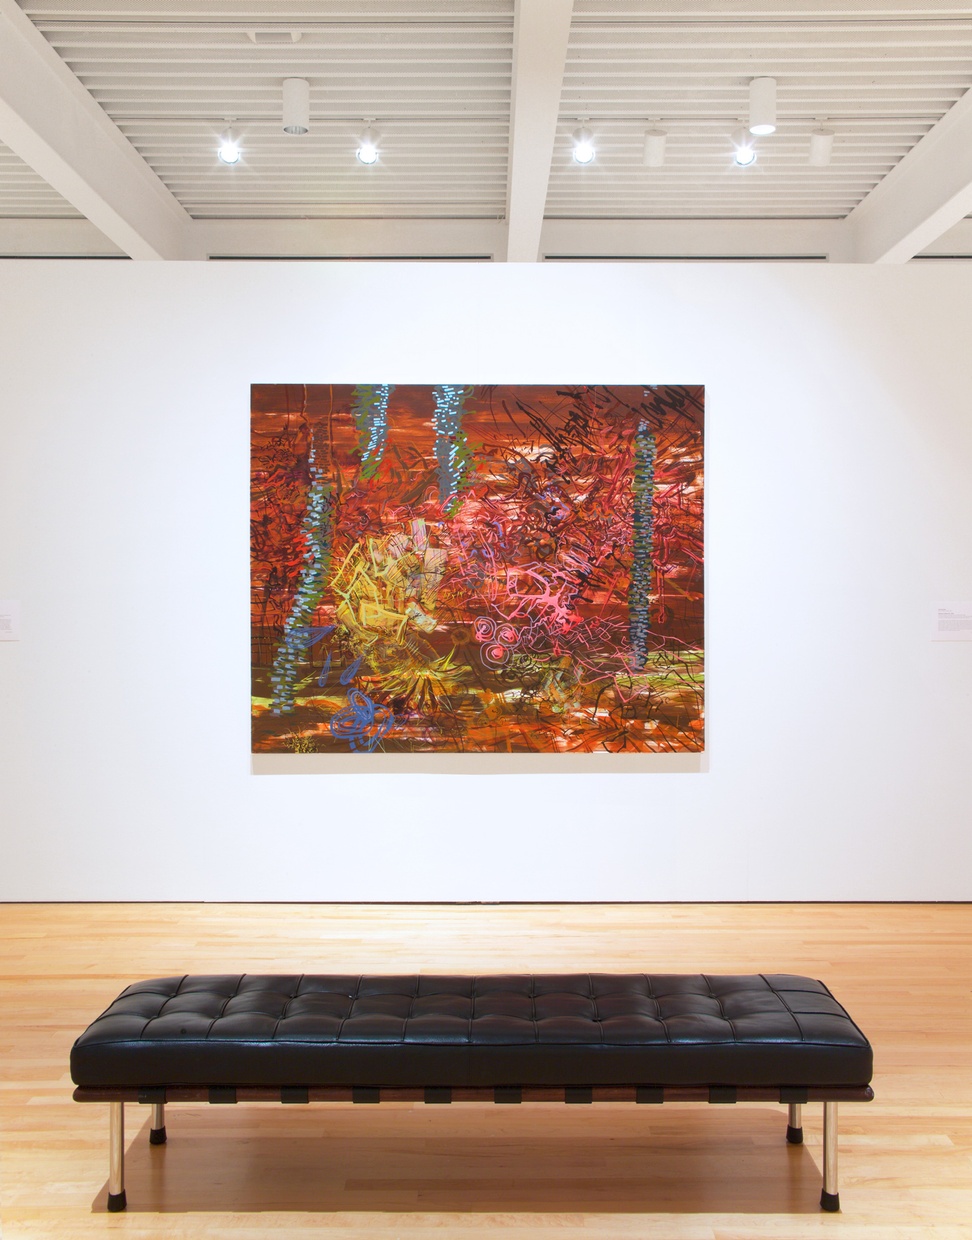 A black leather bench in front of a large, bright abstract painting hung on a while wall.